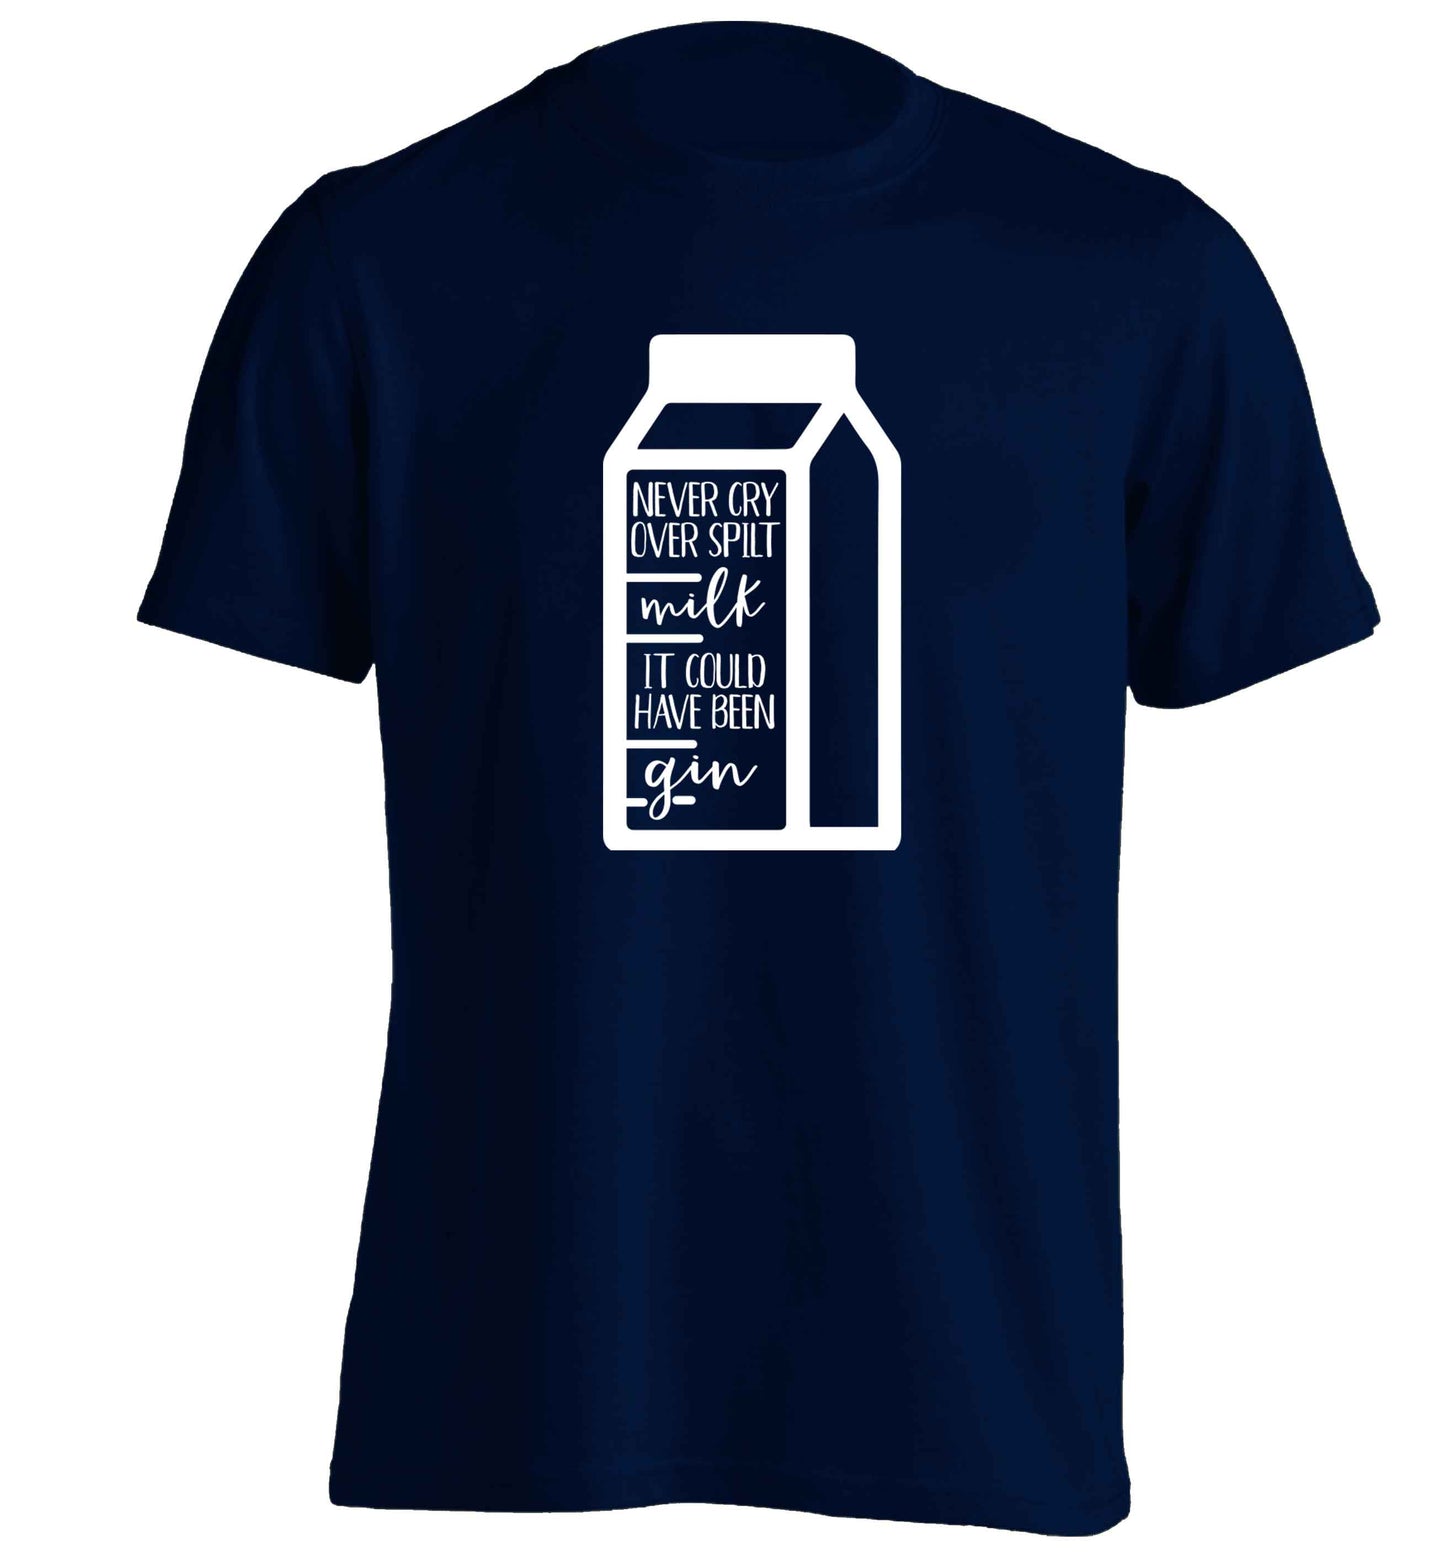 Never cry over spilt milk, it could have been gin adults unisex navy Tshirt 2XL